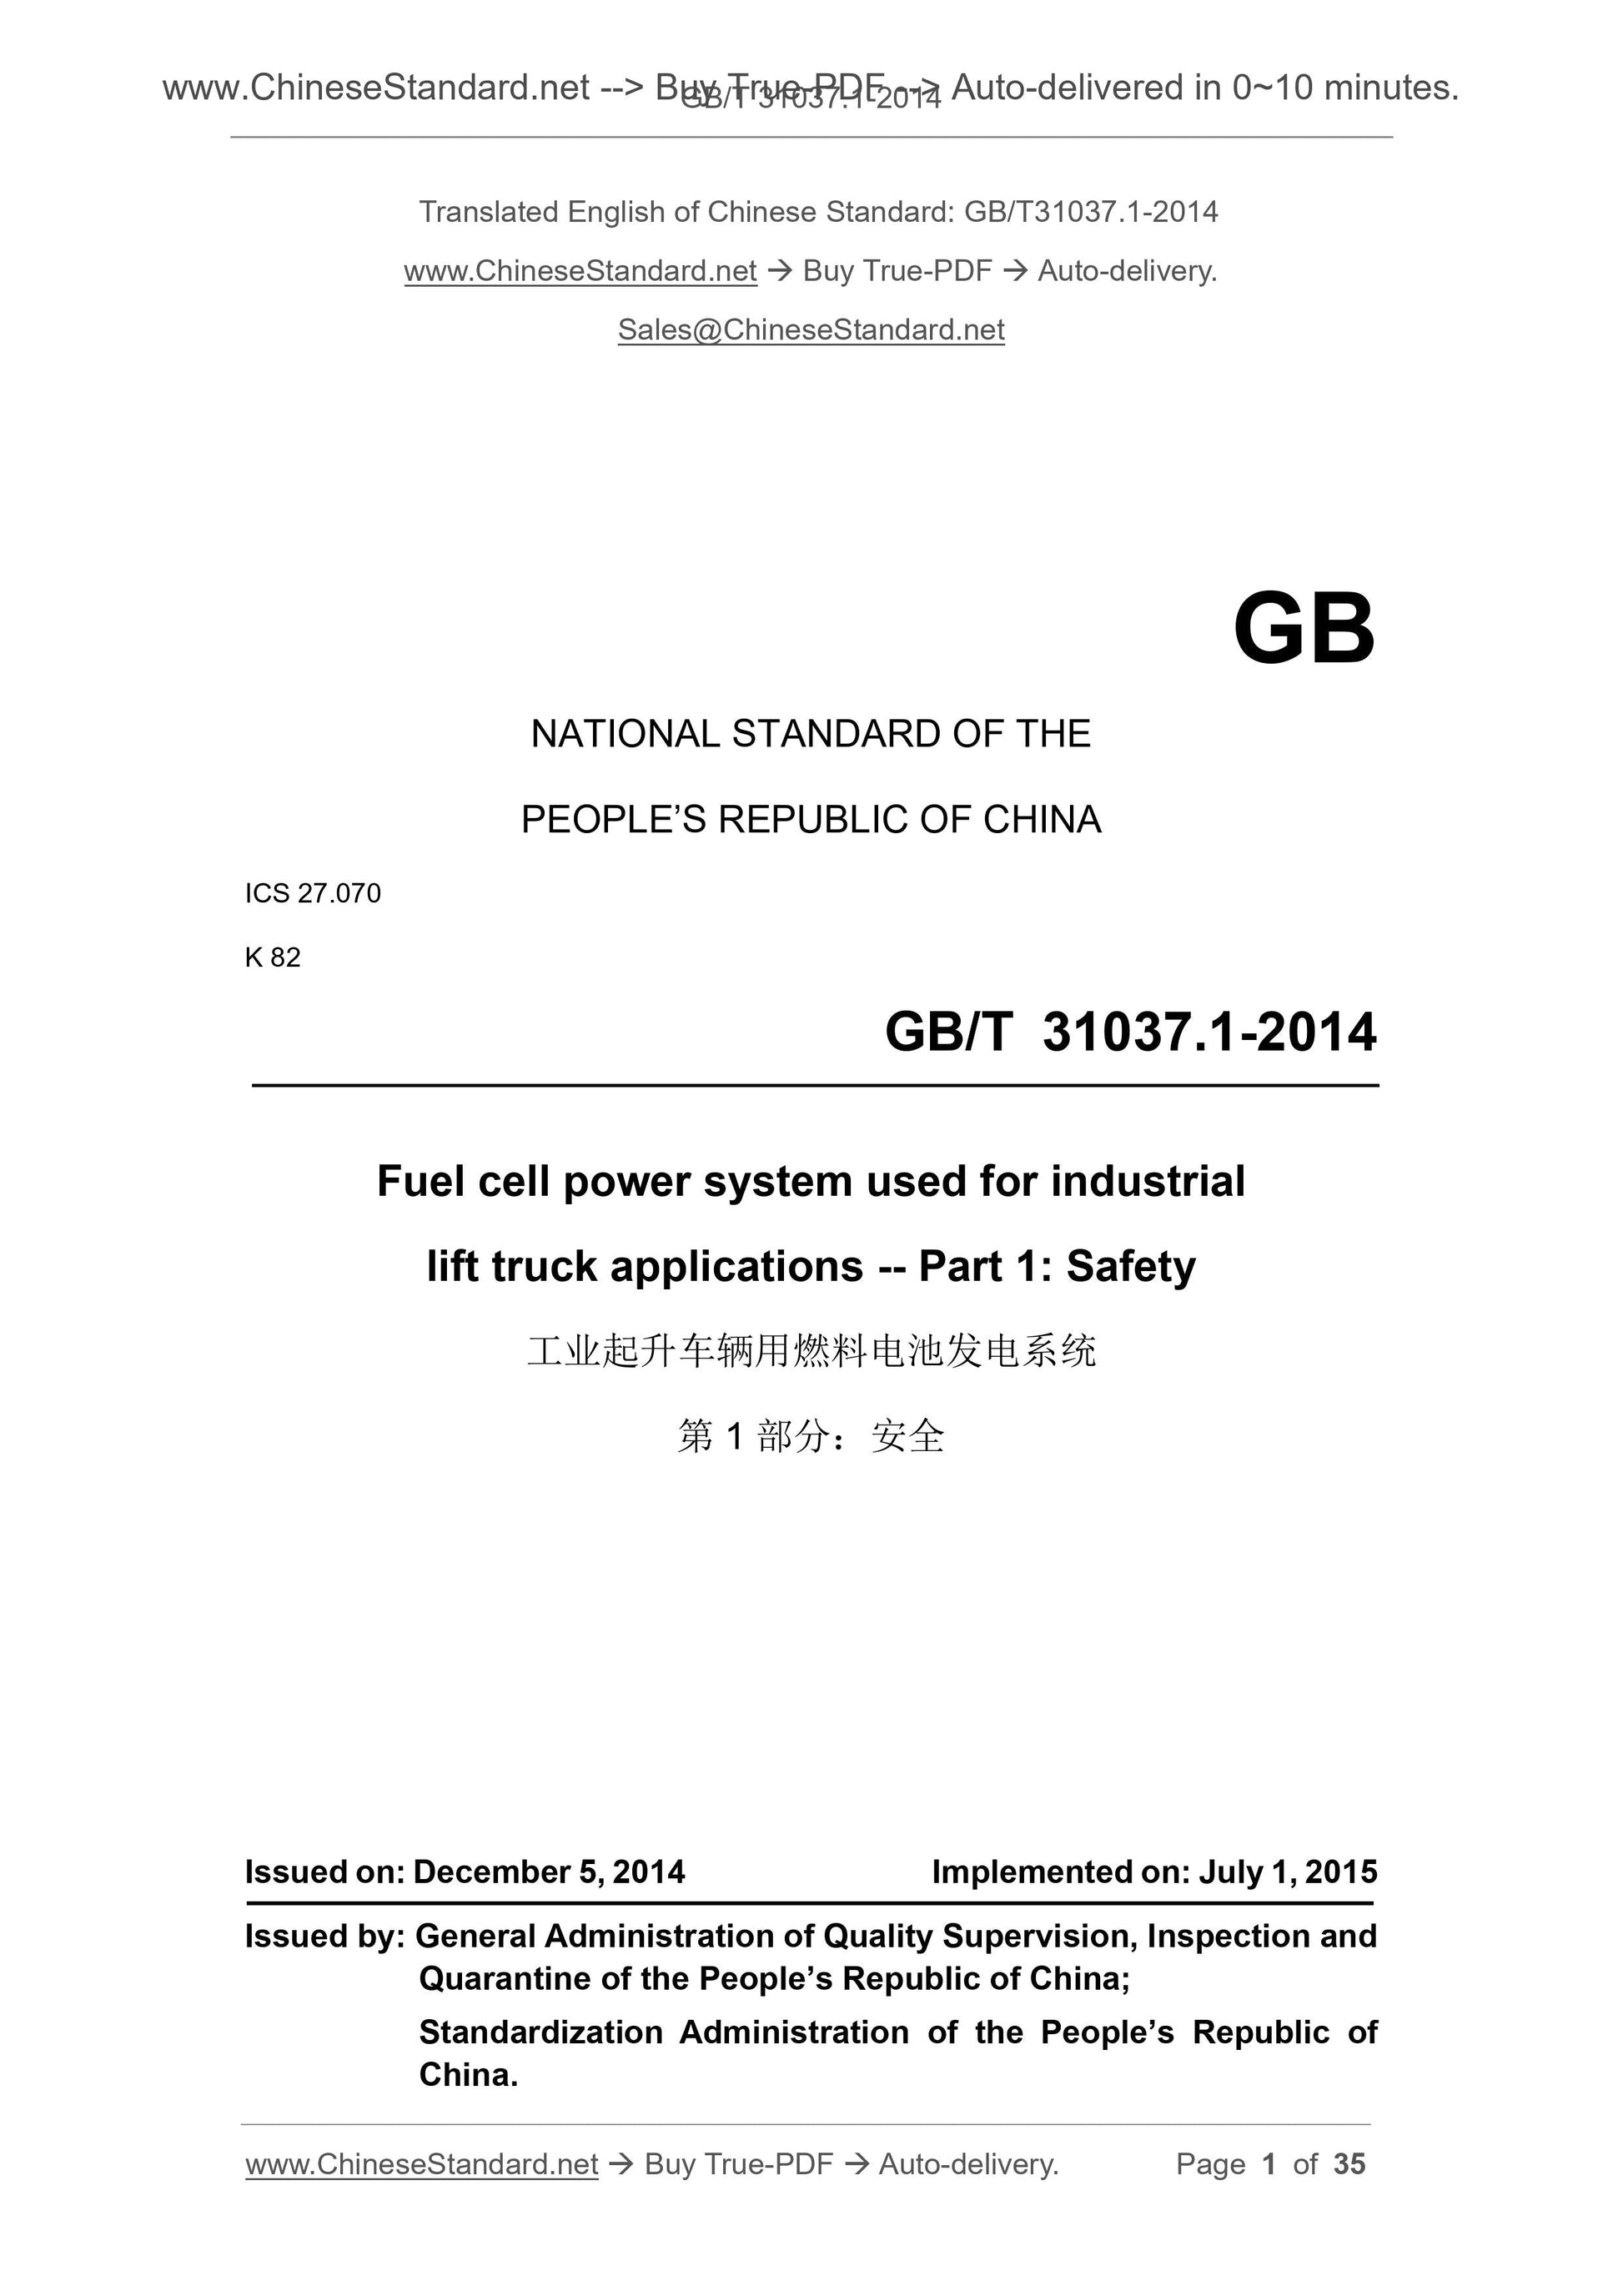 GB/T 31037.1-2014 Page 1